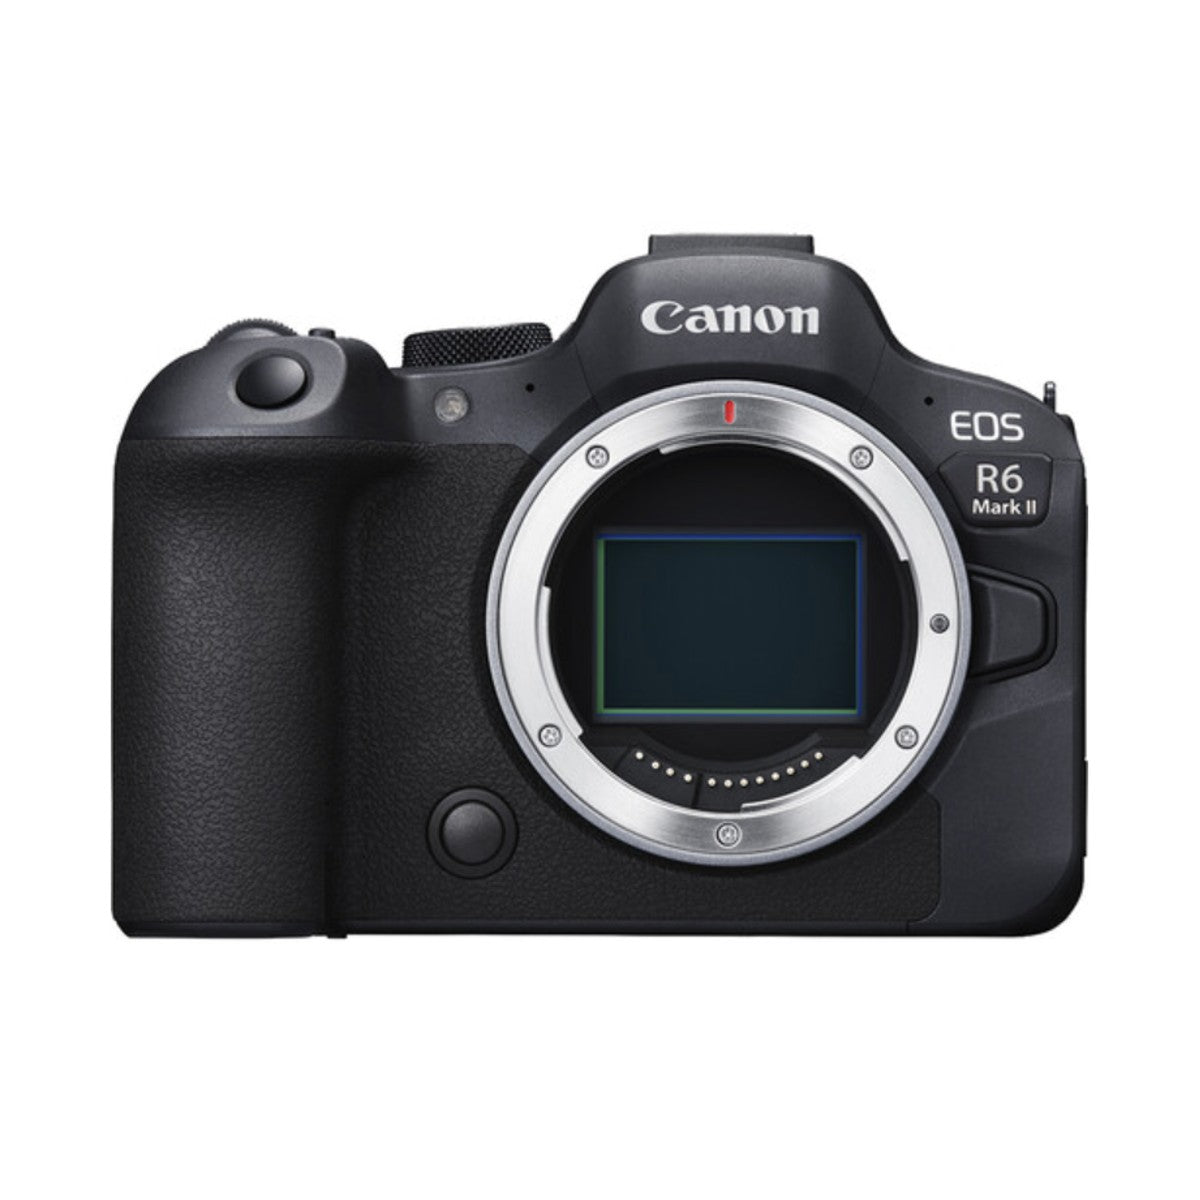 Canon EOS R6 Mark II Mirrorless Camera with RF 24-105mm f4L IS USM Lens